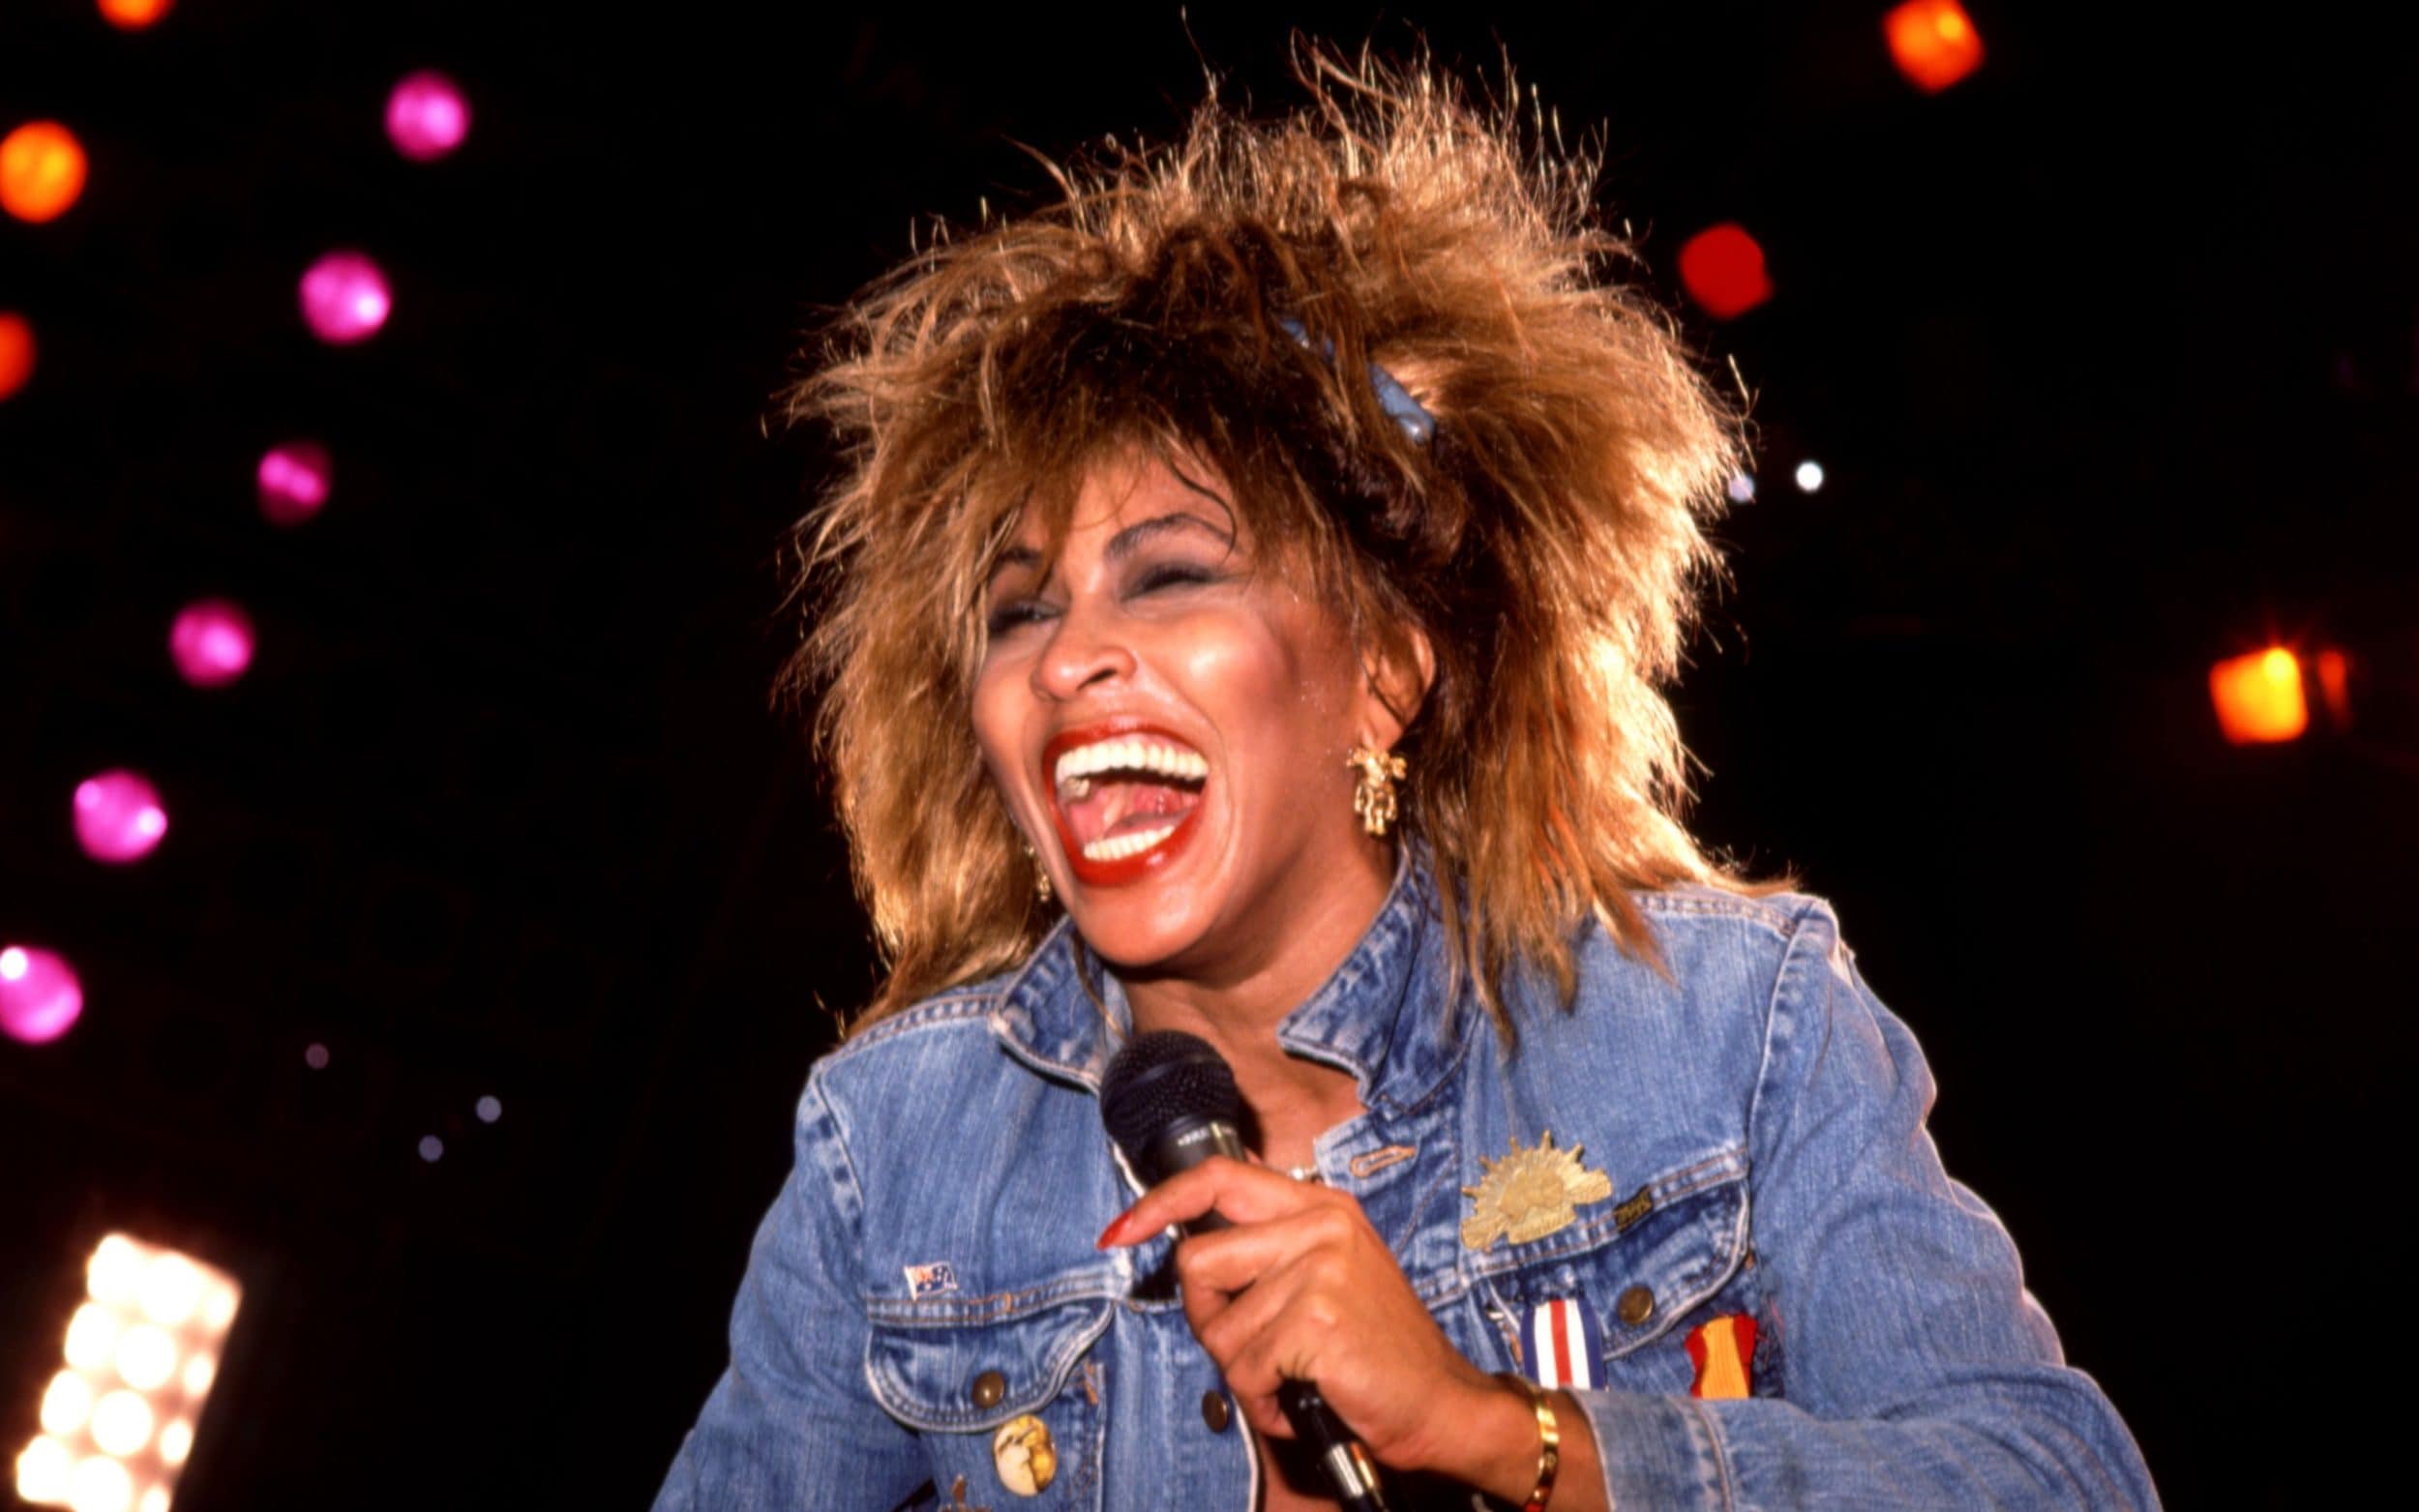 Tina Turner's Break Every Rule is set for a vinyl reissue